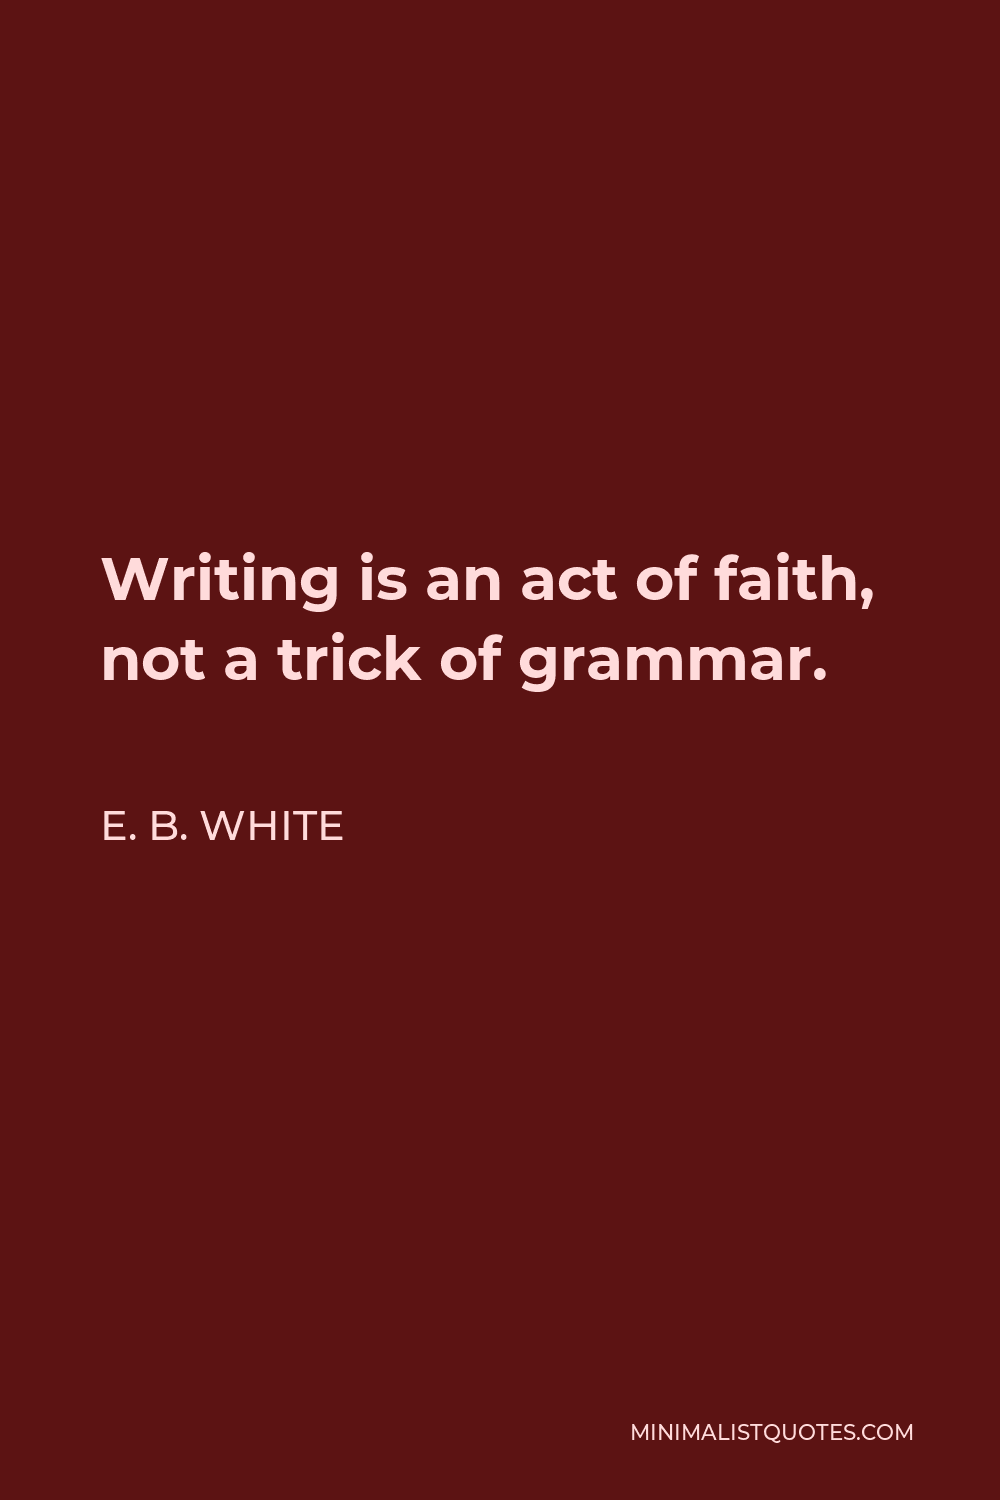 E. B. White Quote - Writing is an act of faith, not a trick of grammar.